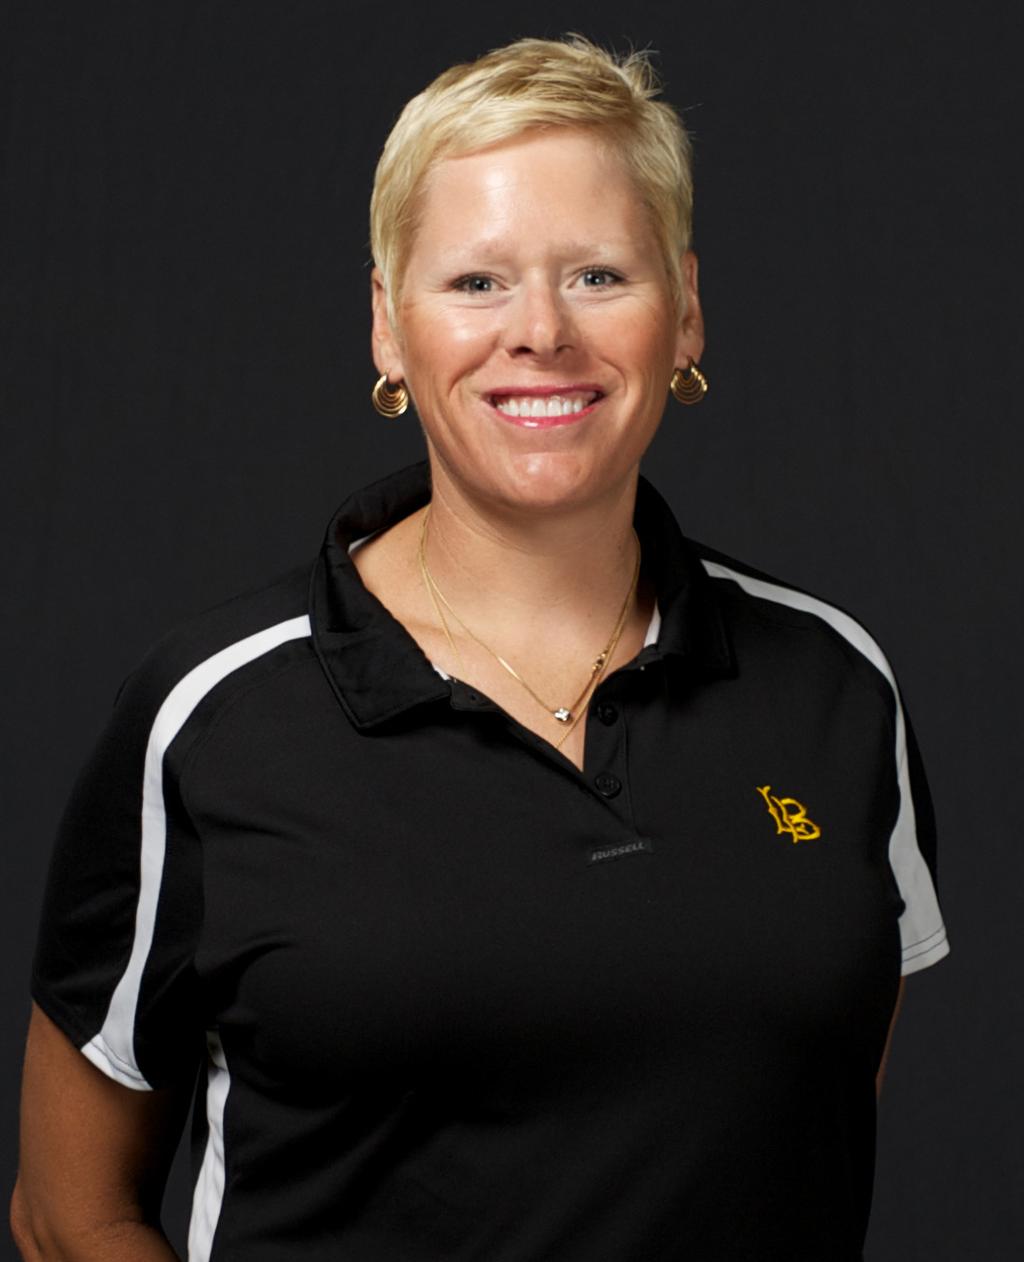 Jenny Hilt-Costello 16th Season In her 15 seasons as a head coach at Long Beach State, Jenny Hilt-Costello has taken the 49er women s tennis program into the national elite. Reaching No.